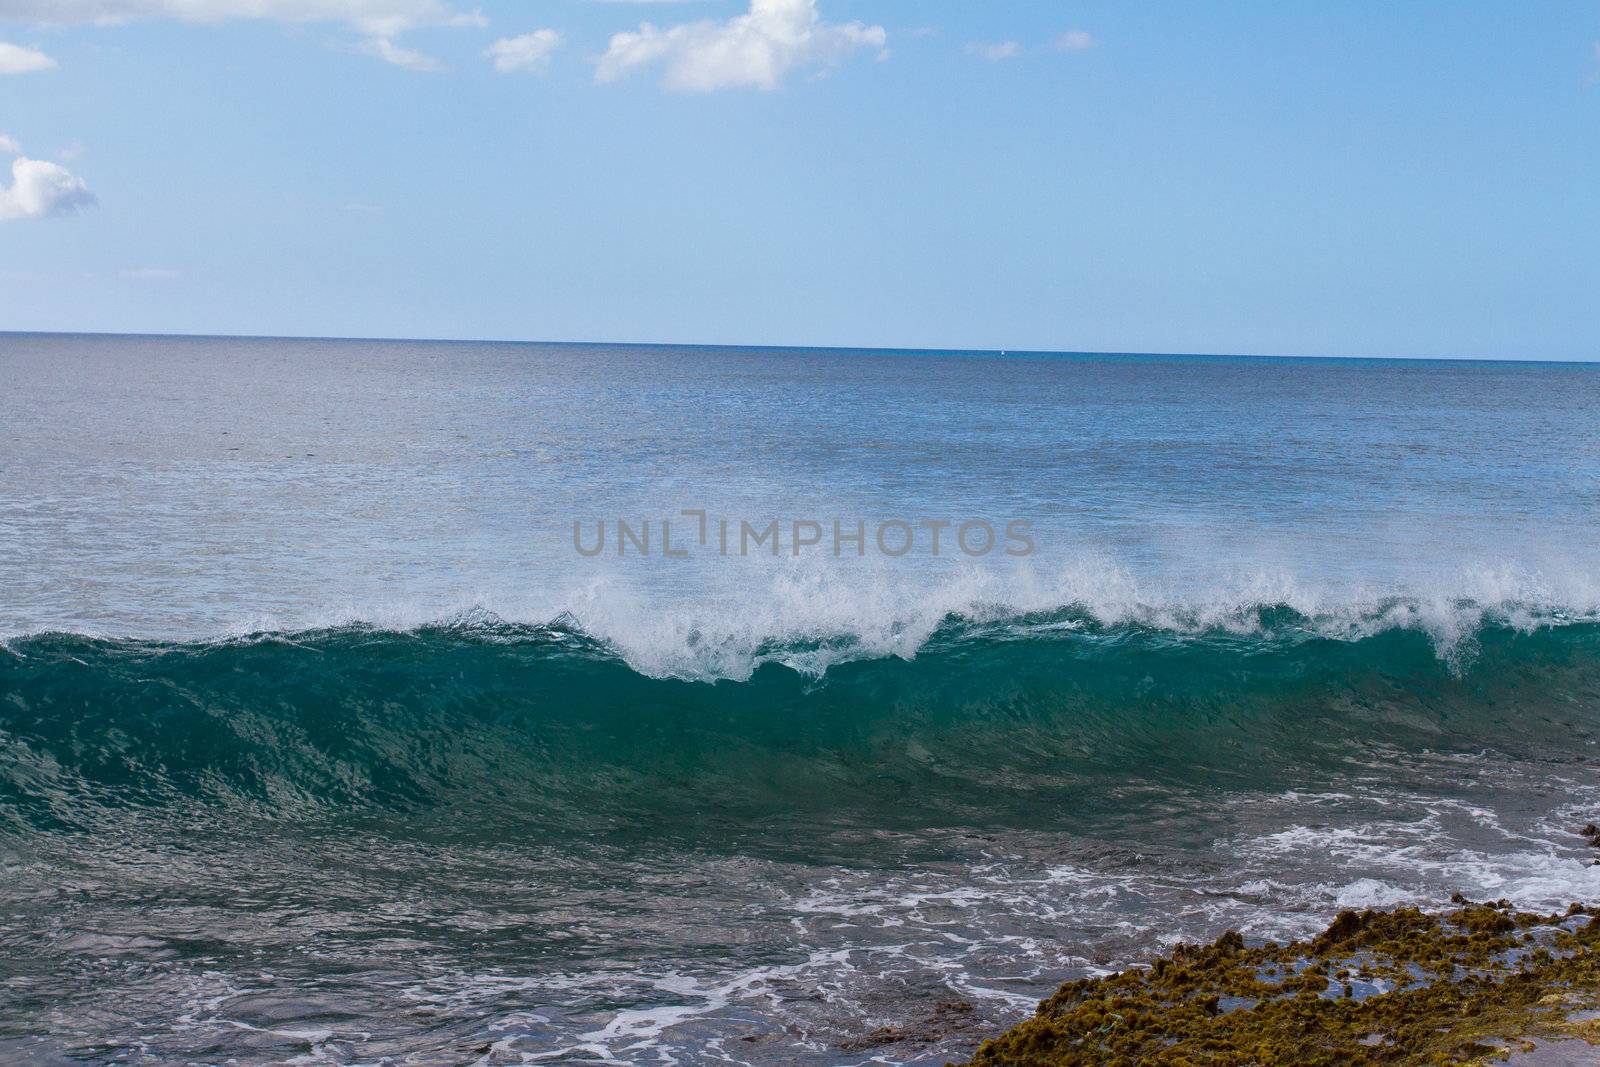 These almost completely clear waves are swelling and breaking onto some rocks on Oahu Hawaii. These waves are interesting and different than most.